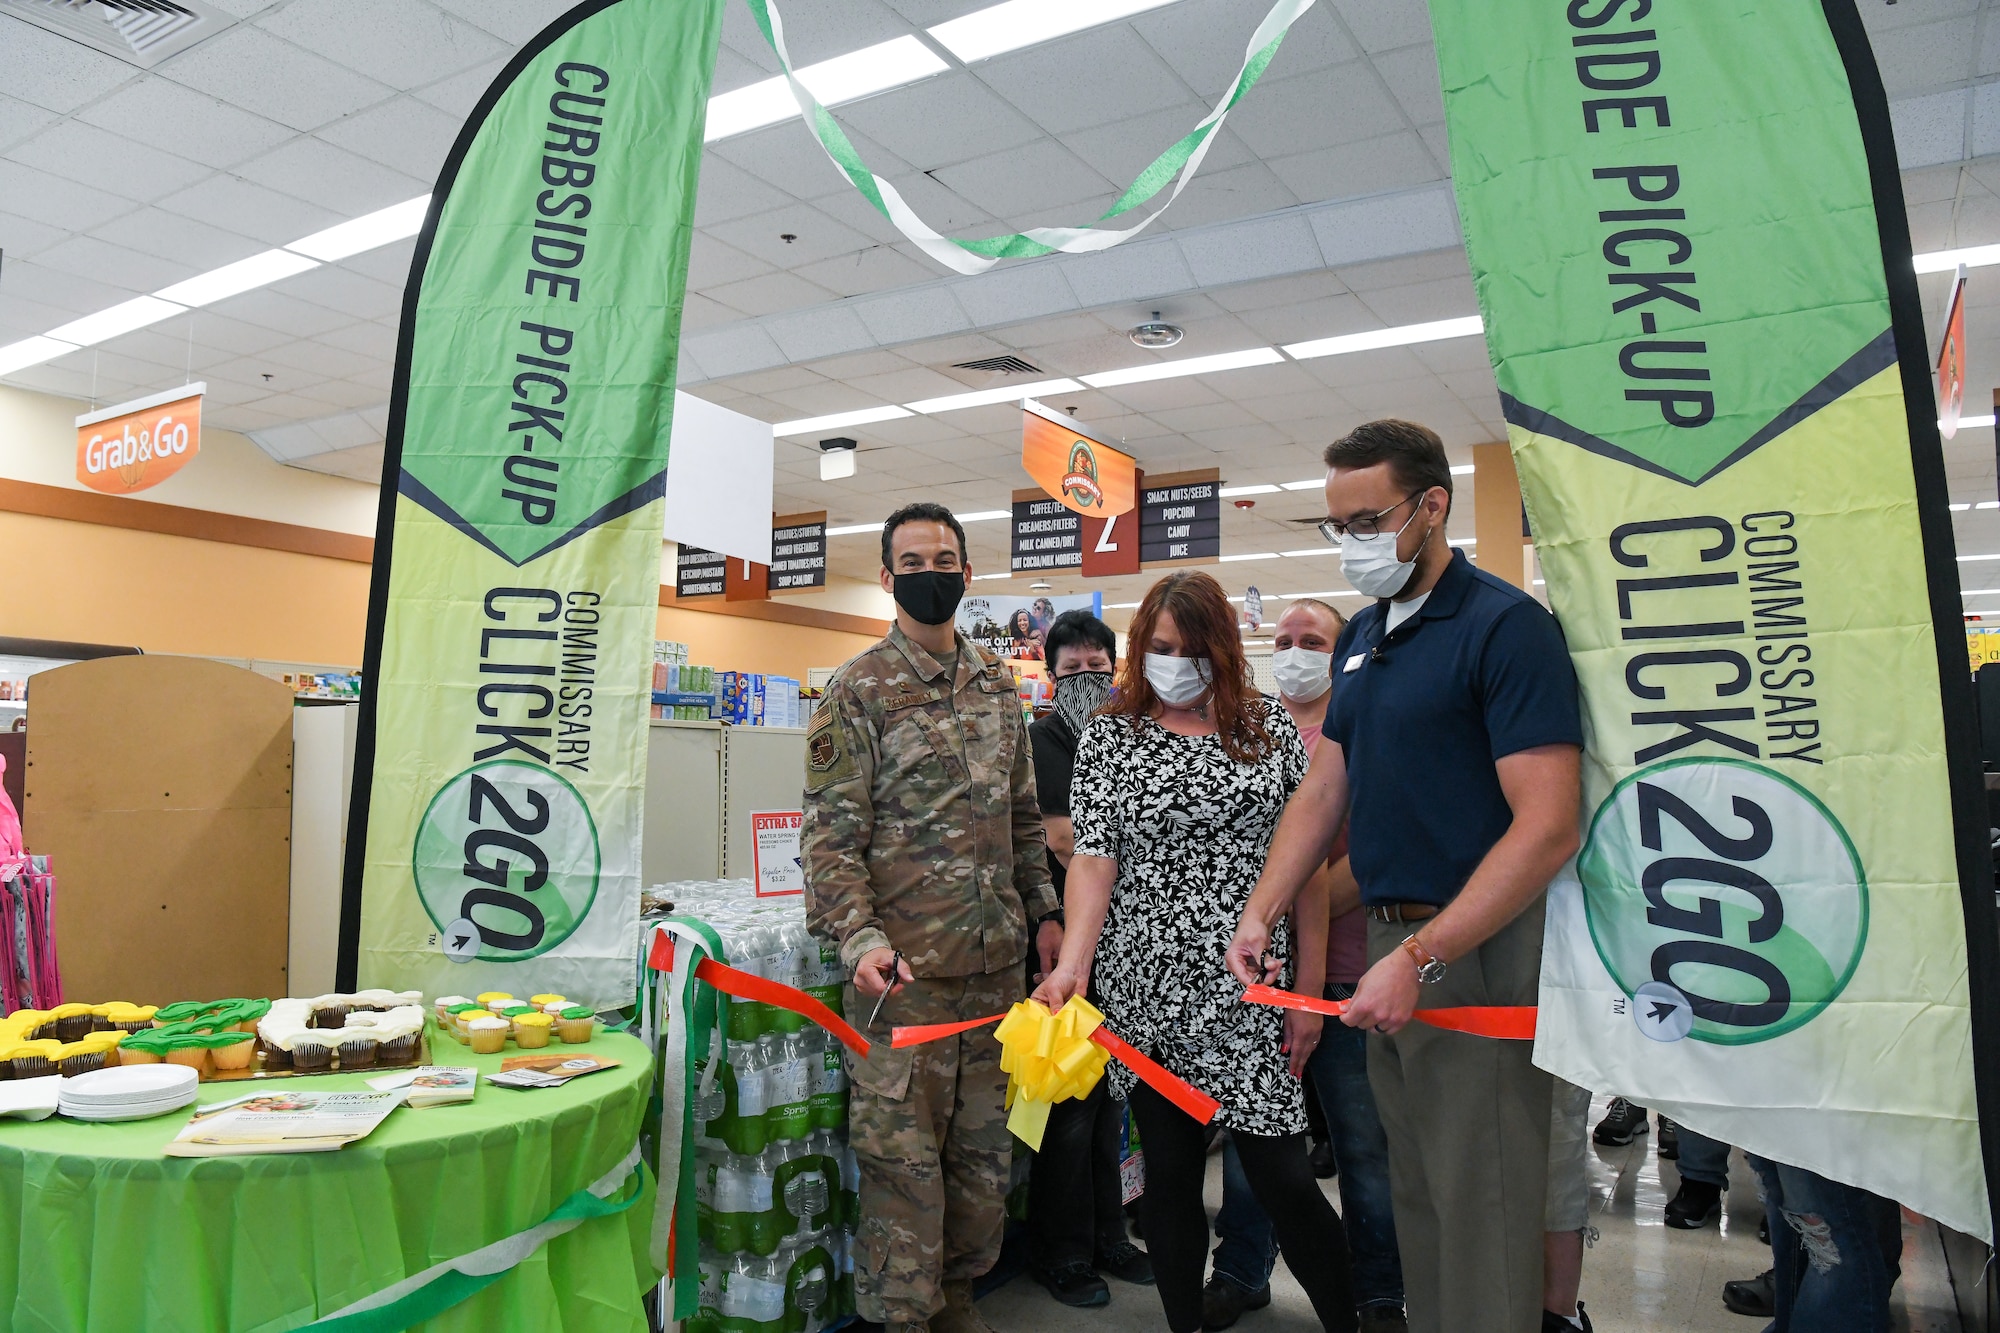 Col. Jeffrey Geraghty, left, commander of Arnold Engineering Development Complex headquartered at Arnold Air Force Base, Tenn., and Brandon Jelson, store director of the Arnold AFB Commissary, cut the ribbon during a ceremony to celebrate the launch of the CLICK2GO online ordering and curbside pick-up service at the commissary, Aug. 3, 2021. Also pictured, holding the ribbon, is Casey Cooper, grocery manager for the commissary. (U.S. Air Force photo by Jill Pickett)